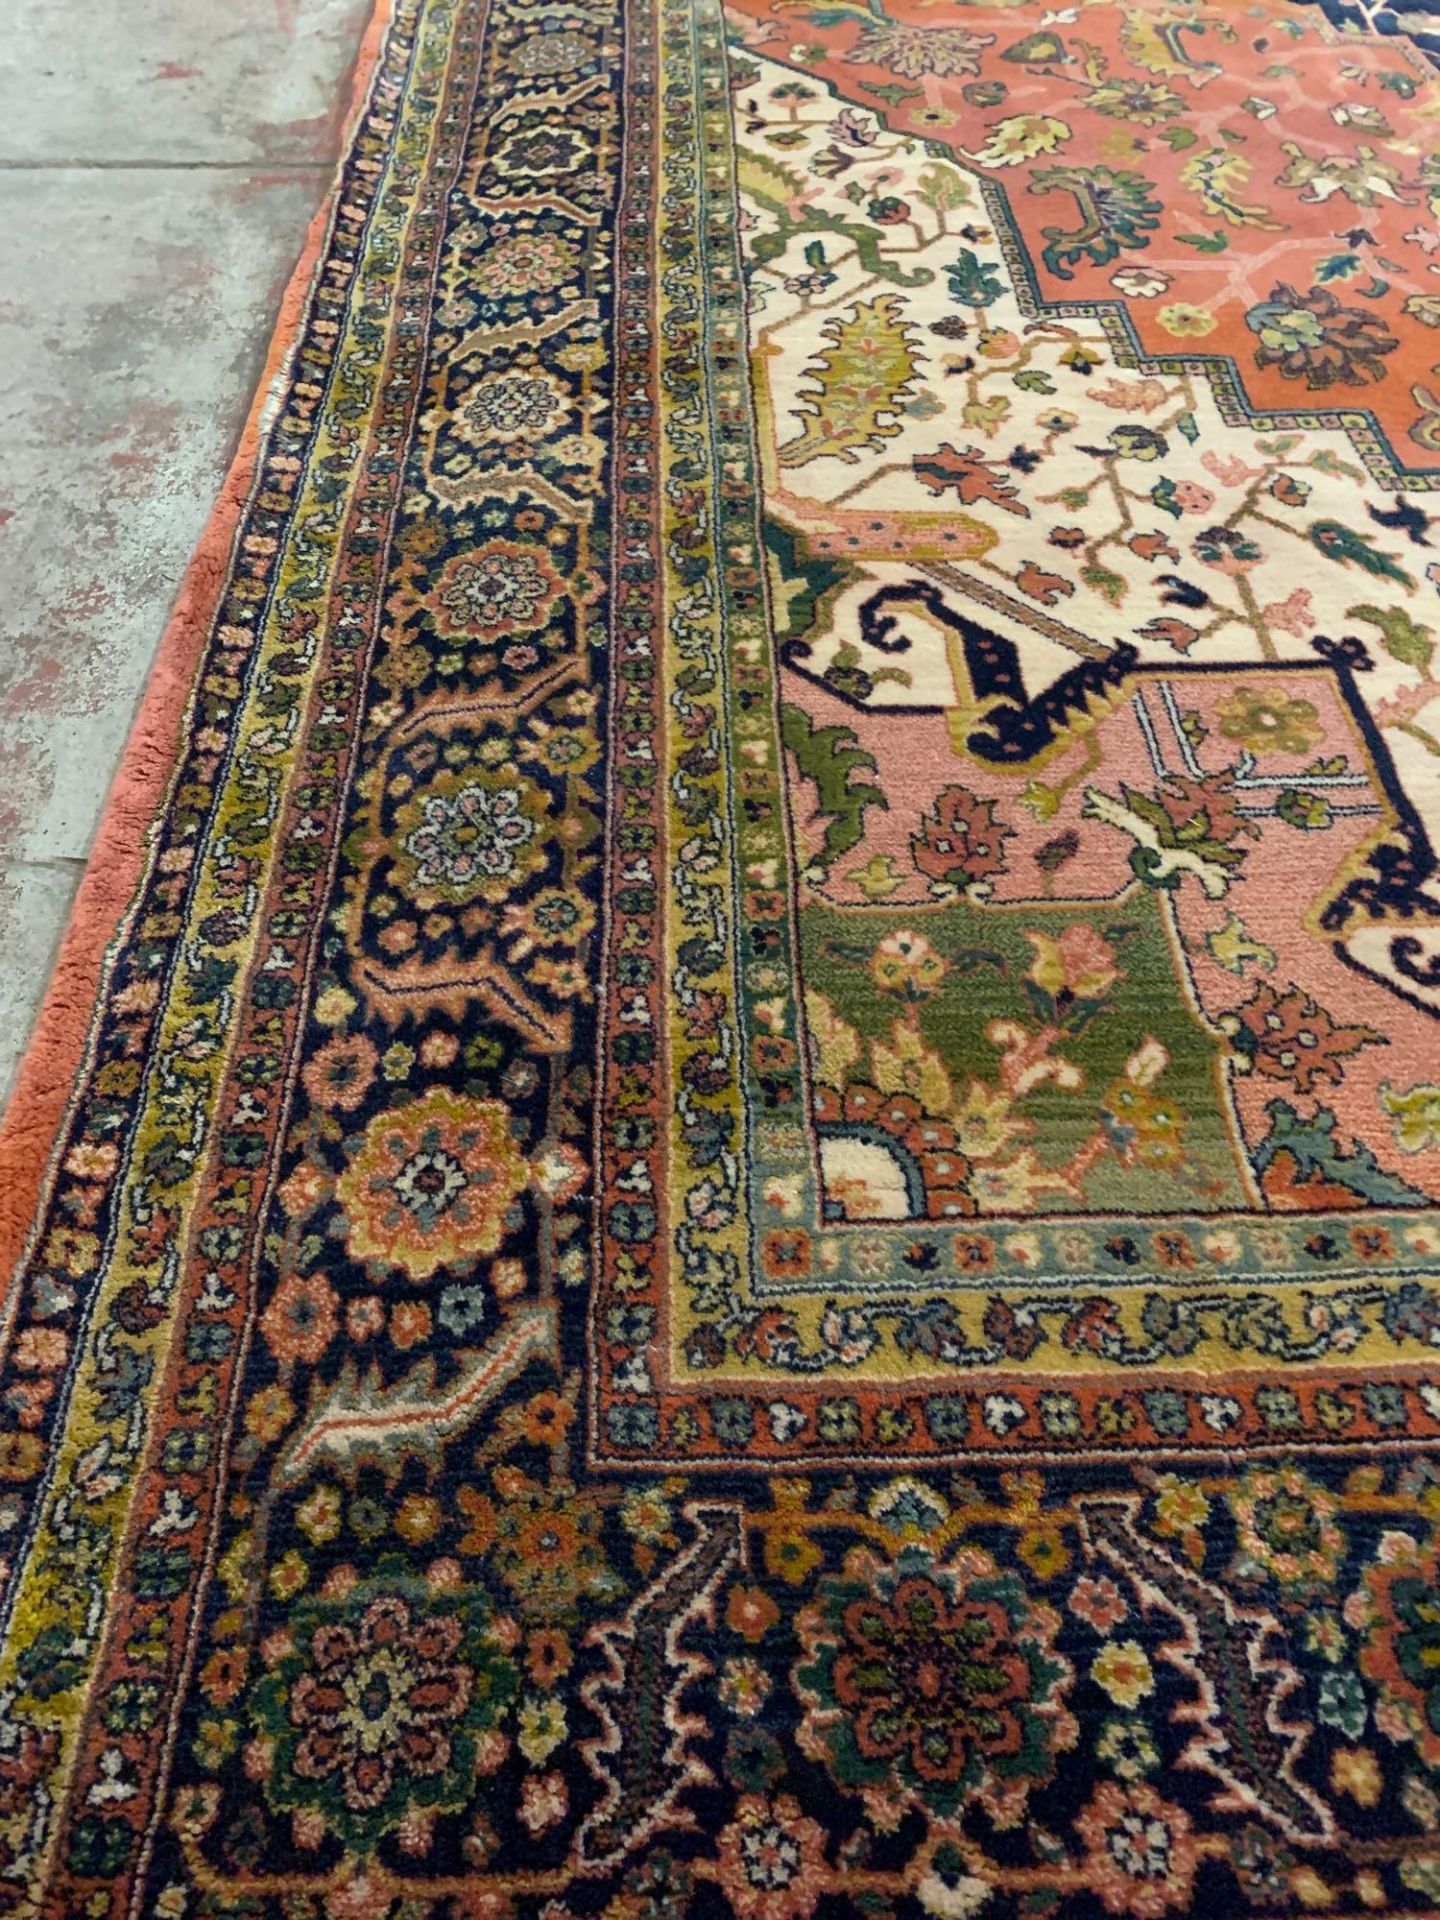 Jaipur Carpet, Rajhastan, North India, Wool On Cotton Foundation. With A Persian 'Heriz' Design, The - Image 6 of 7